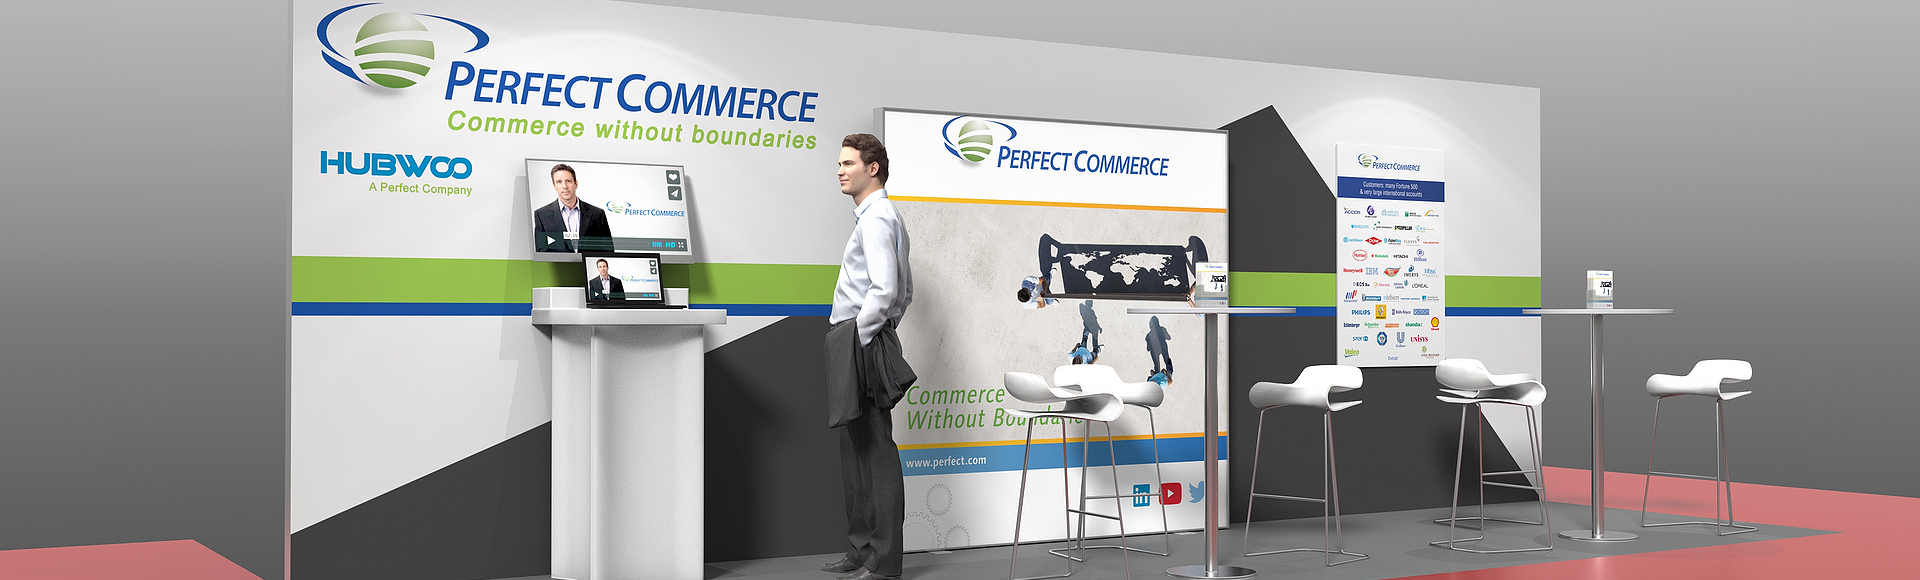 Conception Stand Perfect Commerce